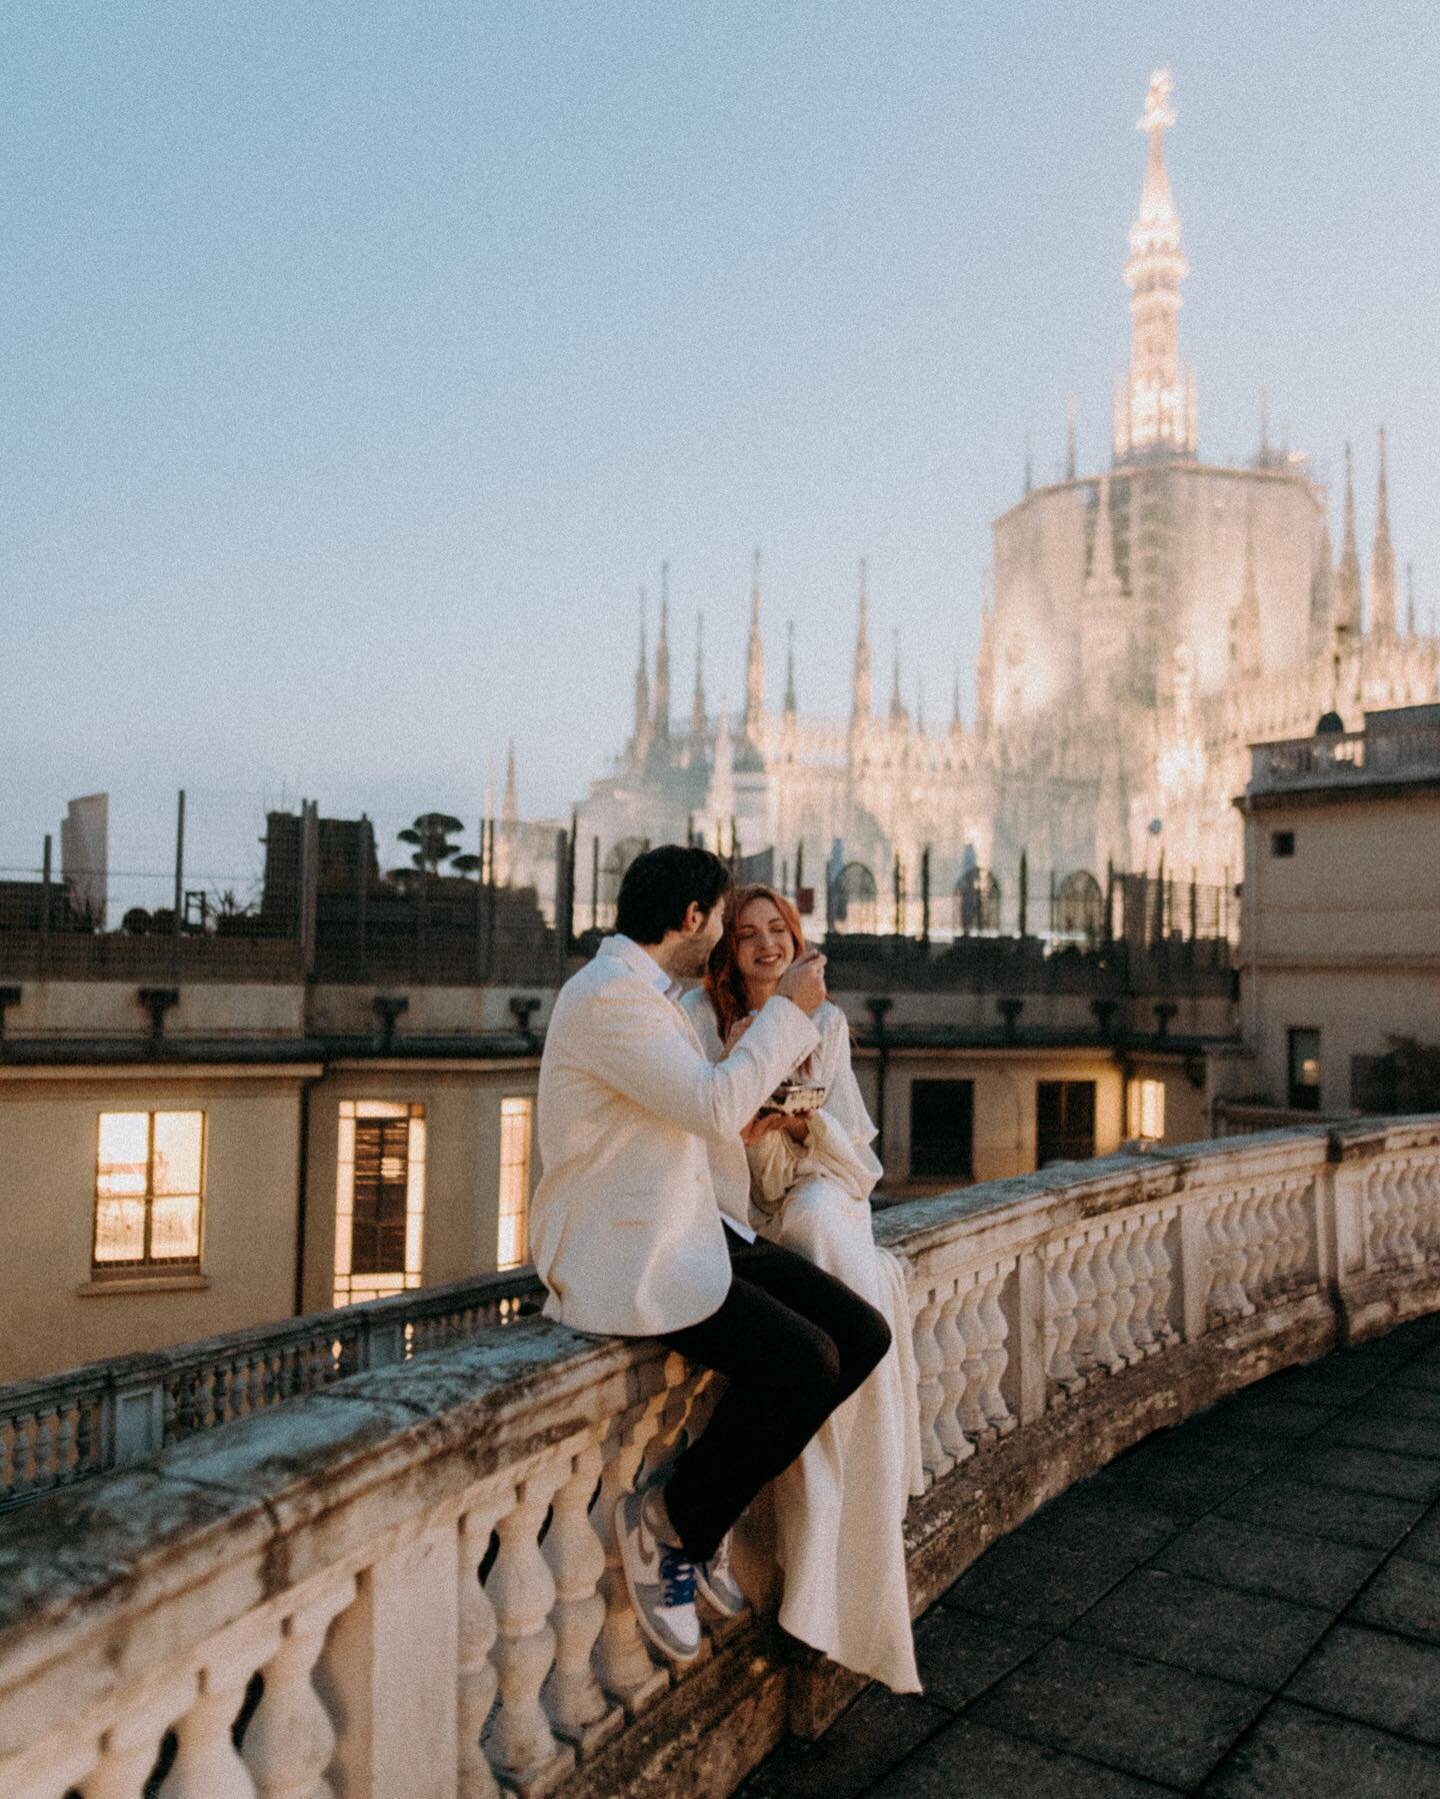 &ldquo;Lets eat Tiramis&ugrave; together forever!&rdquo; Milano Wedding Shoot was amazing ✨
Nothing beats the beauty of the duomo with a delicious Tiramis&ugrave; after Pizza of course 💥

Dress by @twosouls_bridal @ritualunions 

#hochzeitsvideograf